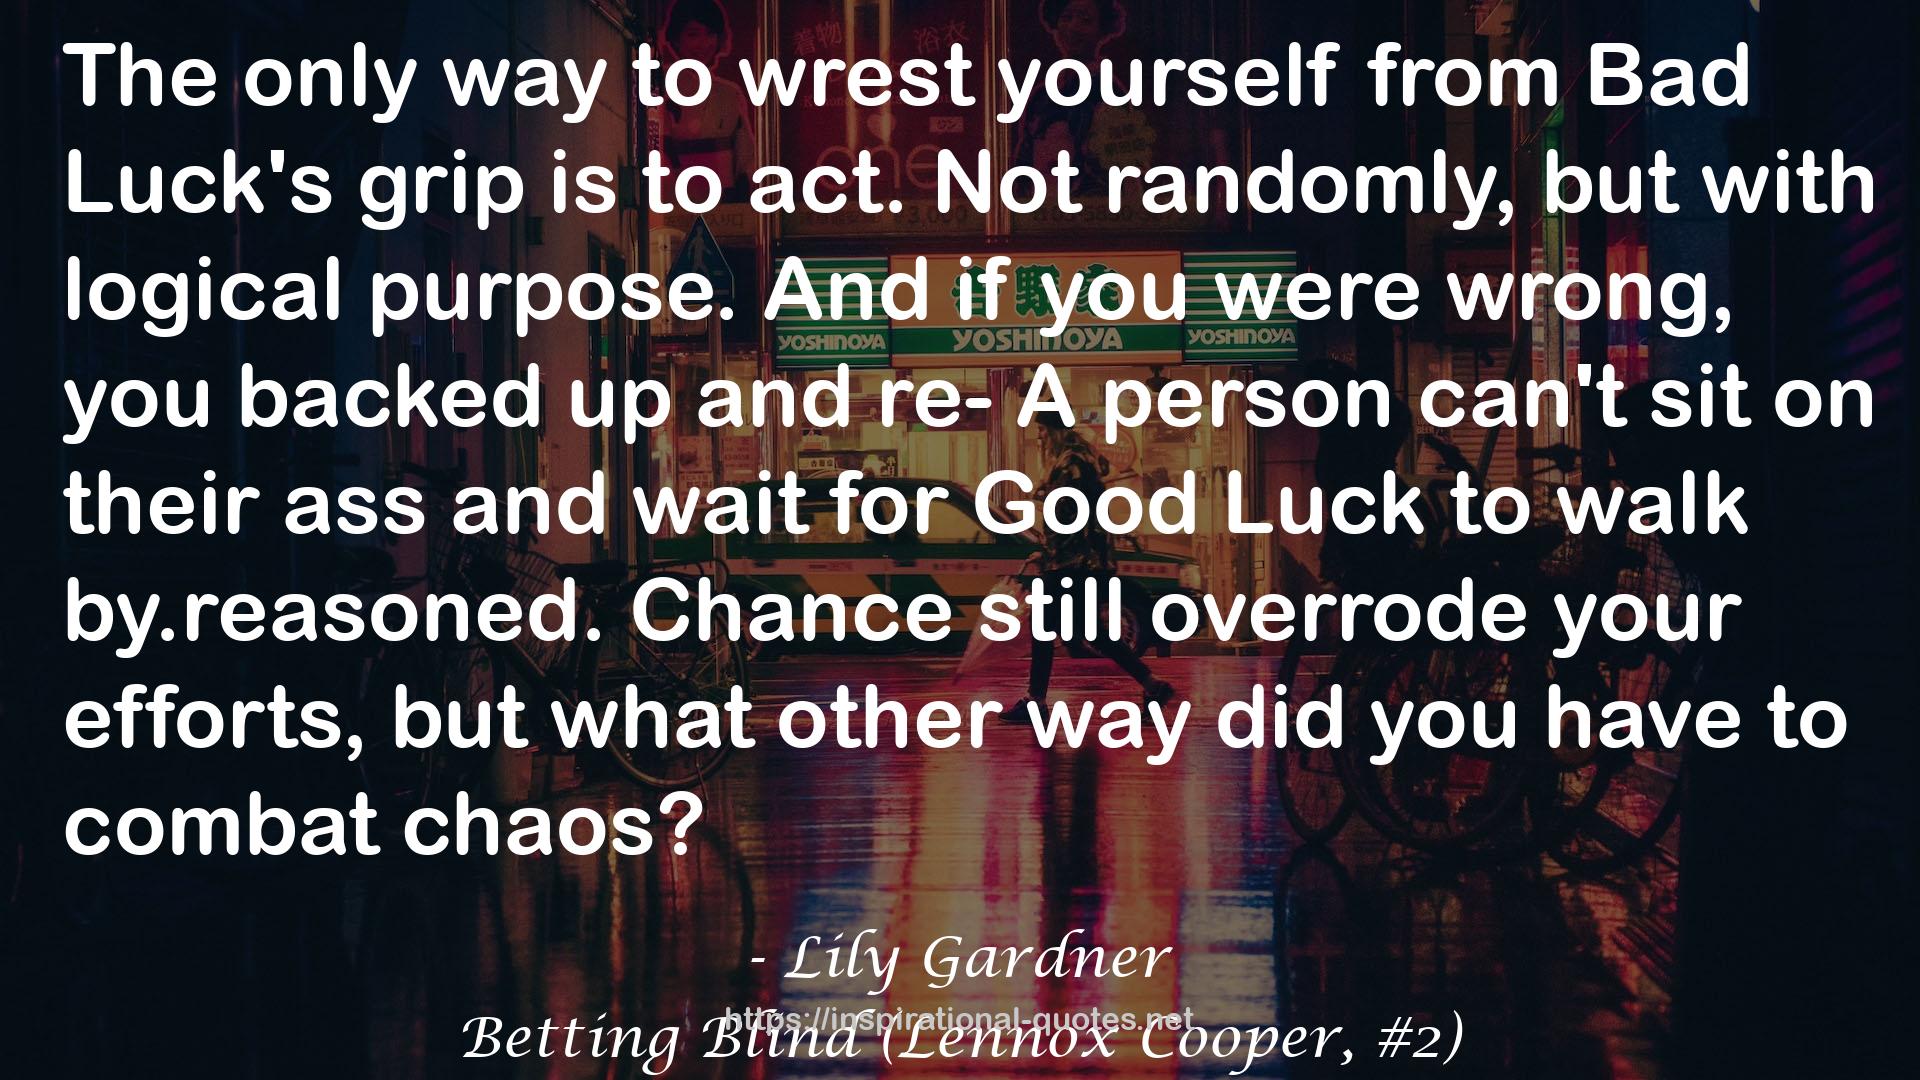 Betting Blind (Lennox Cooper, #2) QUOTES